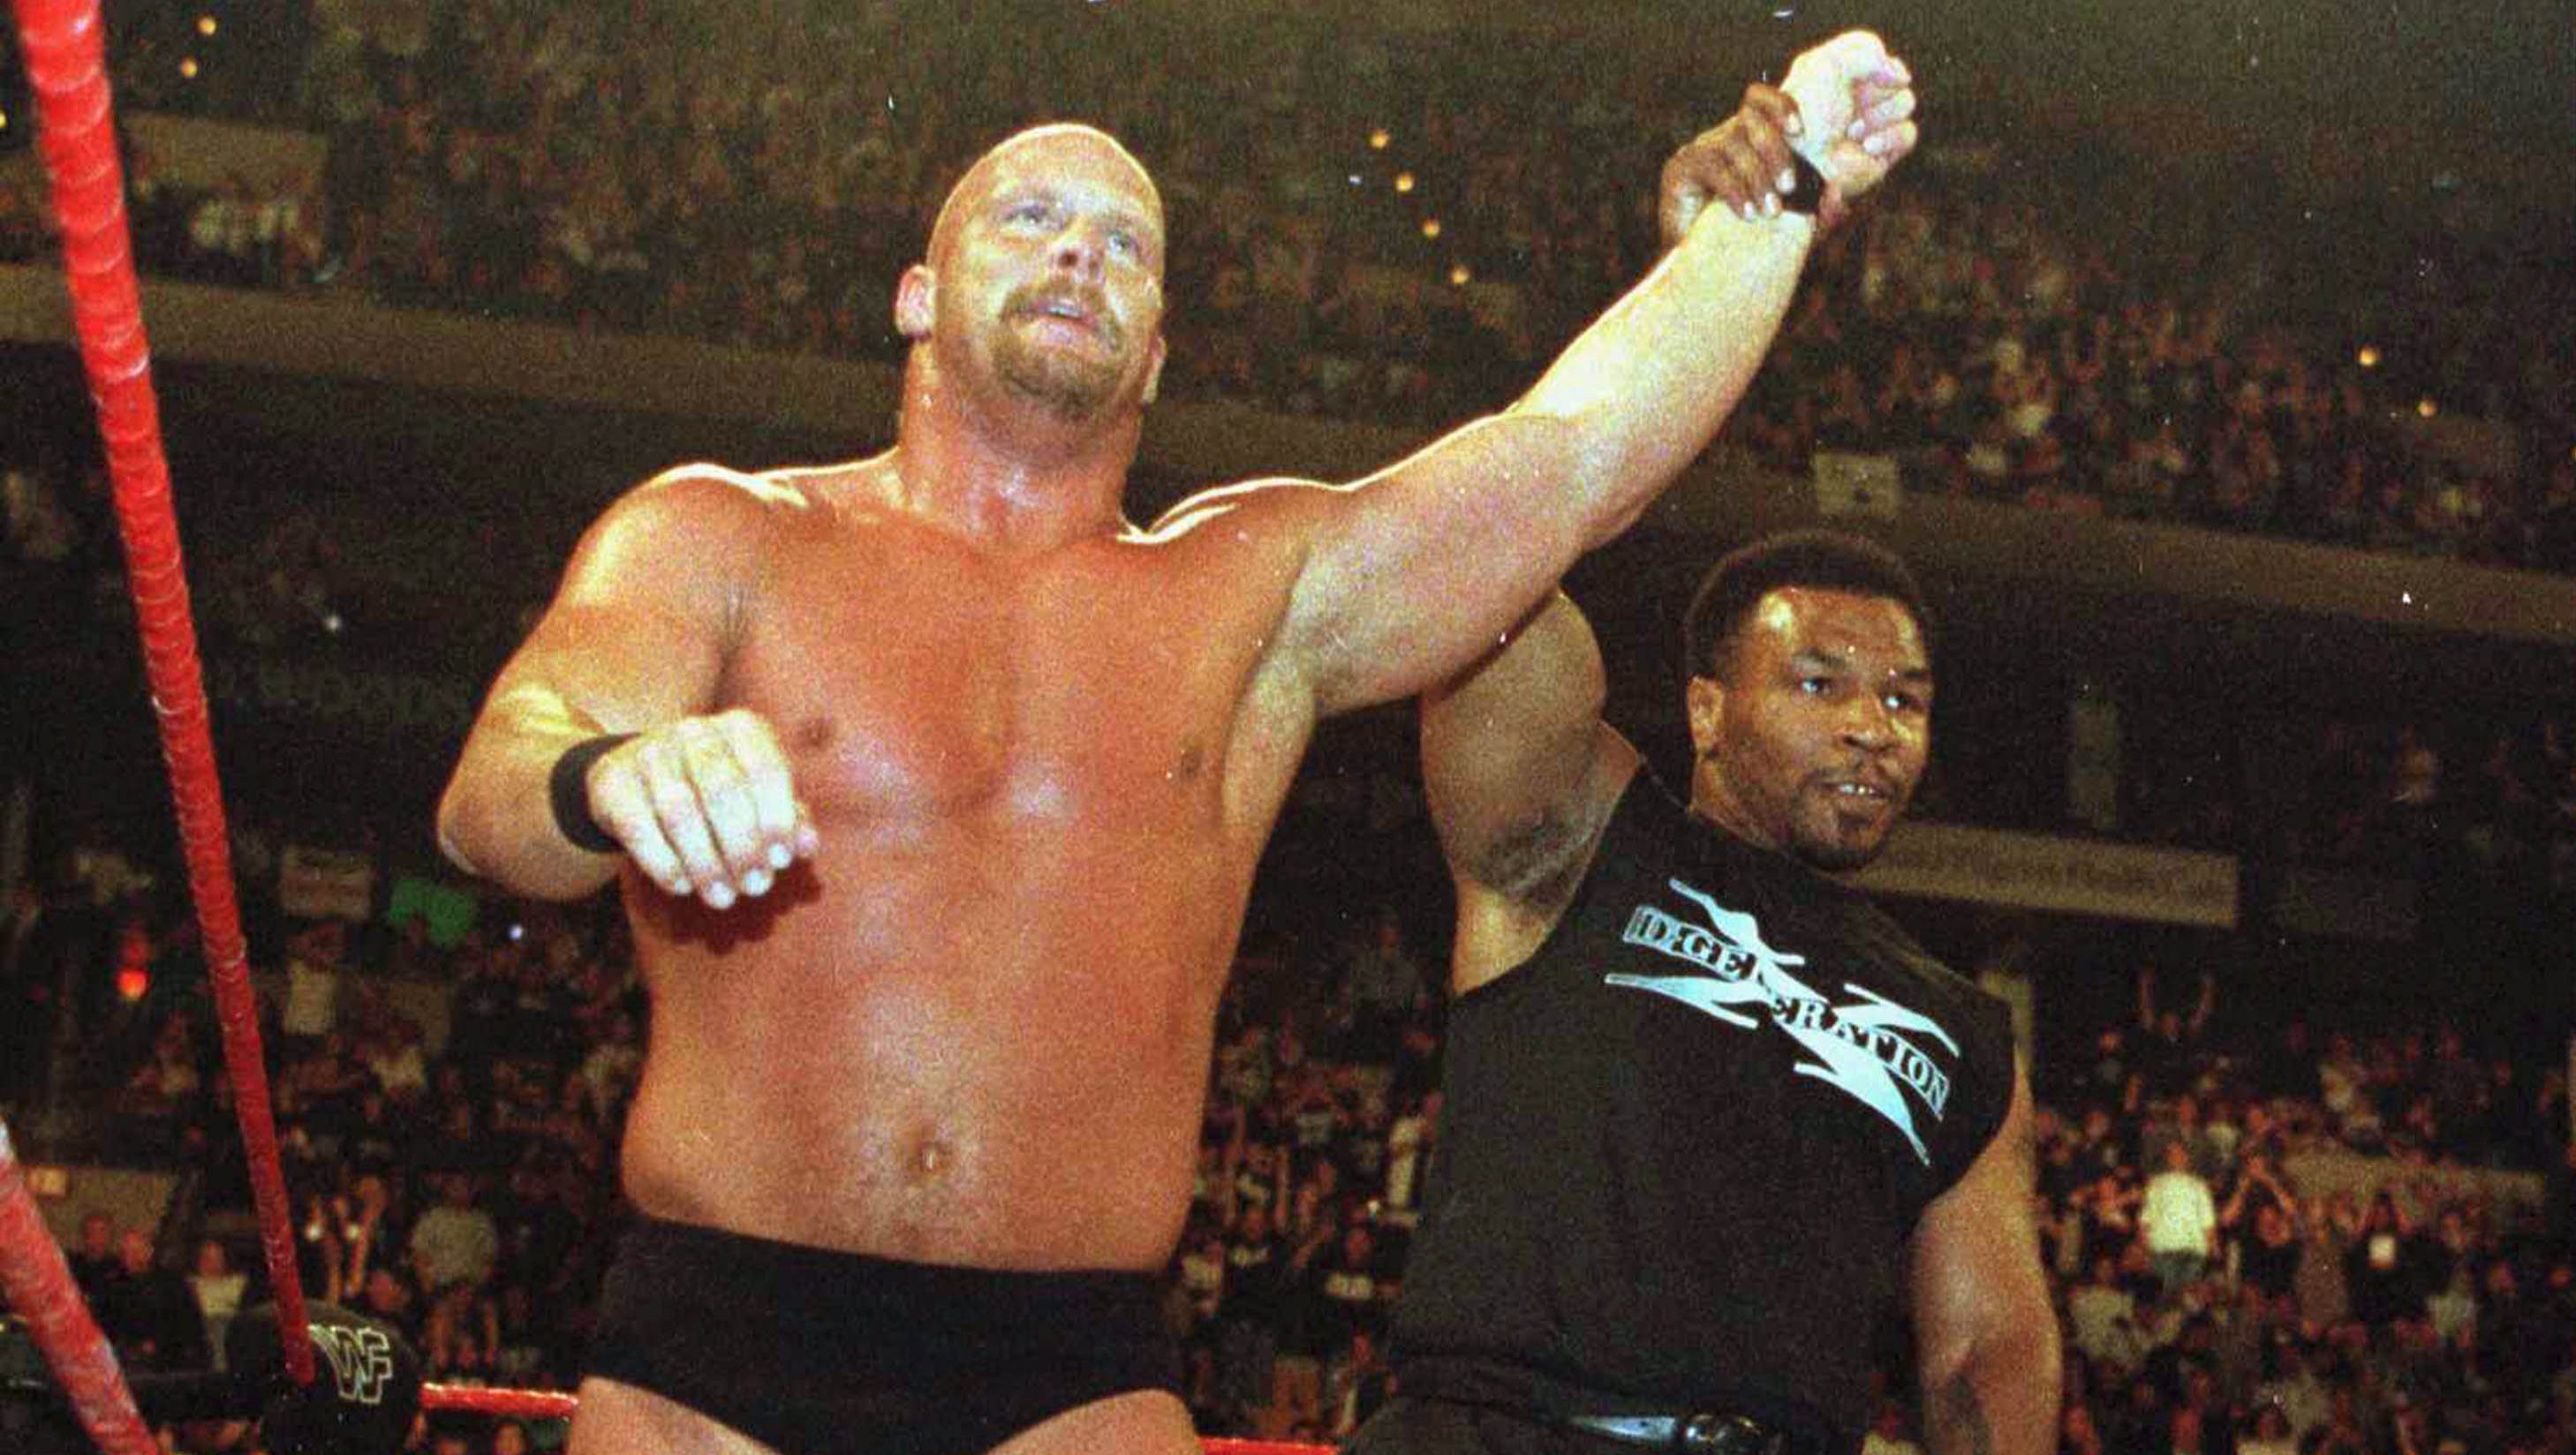 Stone Cold Steve Austin 'Biography' to screen in Indianapolis area